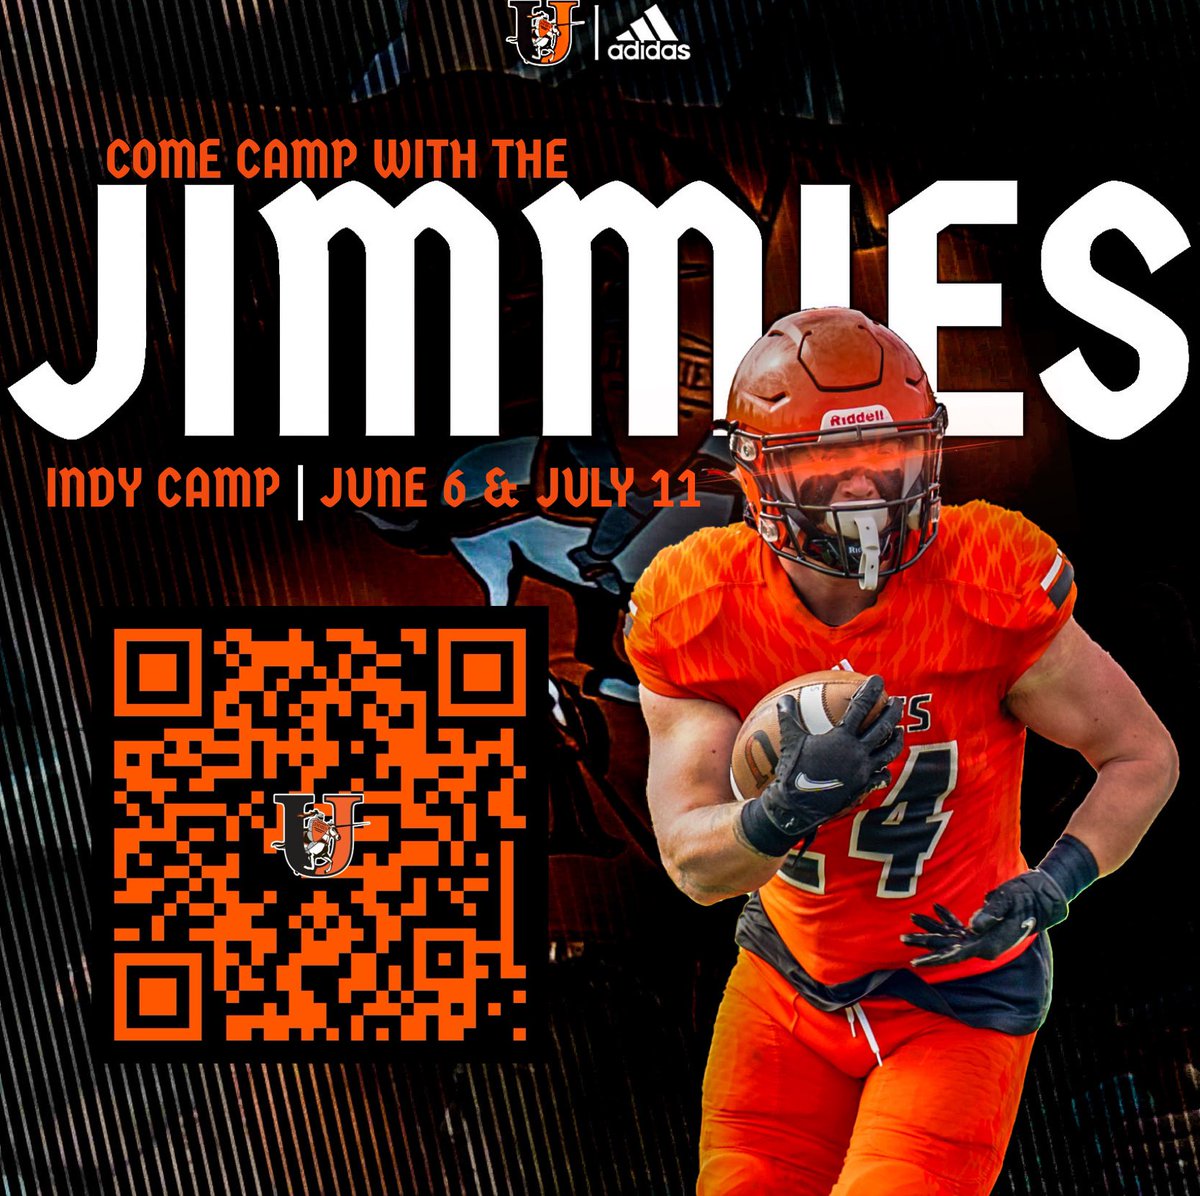 Come camp with @JimmieFootball this summer‼️ Great opportunity to compete and get evaluated by our staff at an affordable cost‼️ Show up and Show out ‼️ #ChopAndCarry